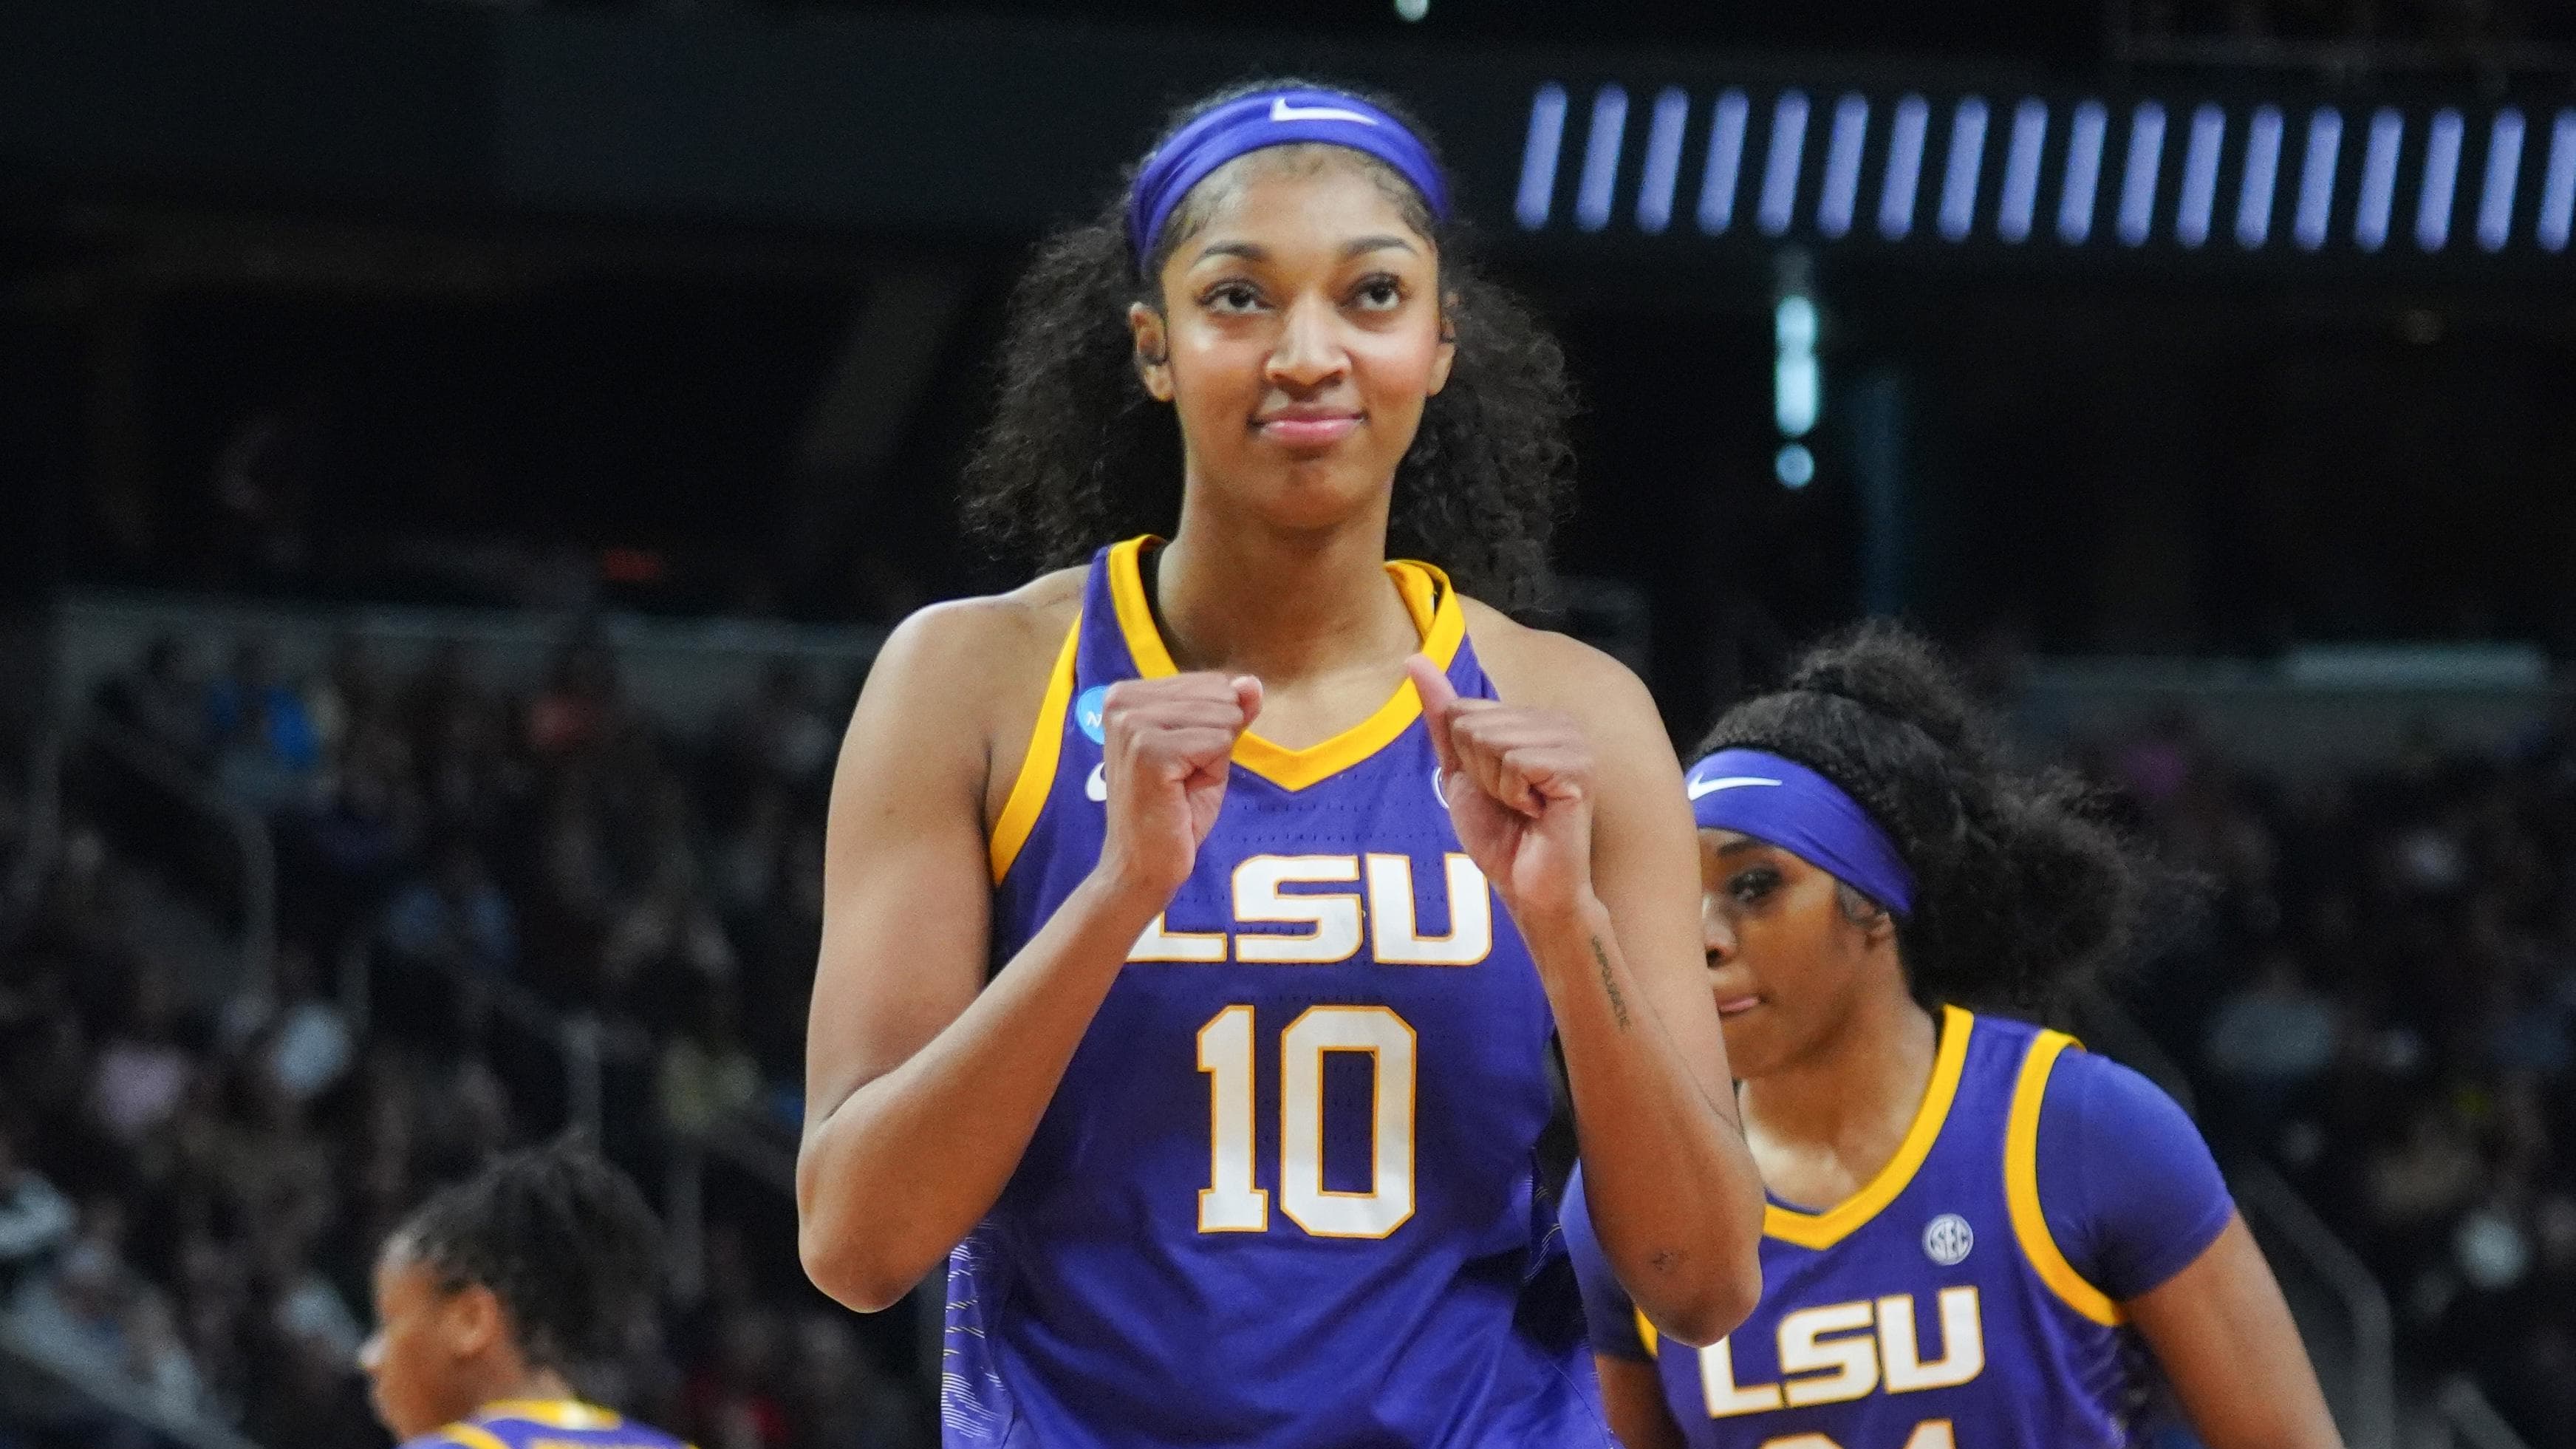 LSU Tigers forward Angel Reese reacts after a foul call.